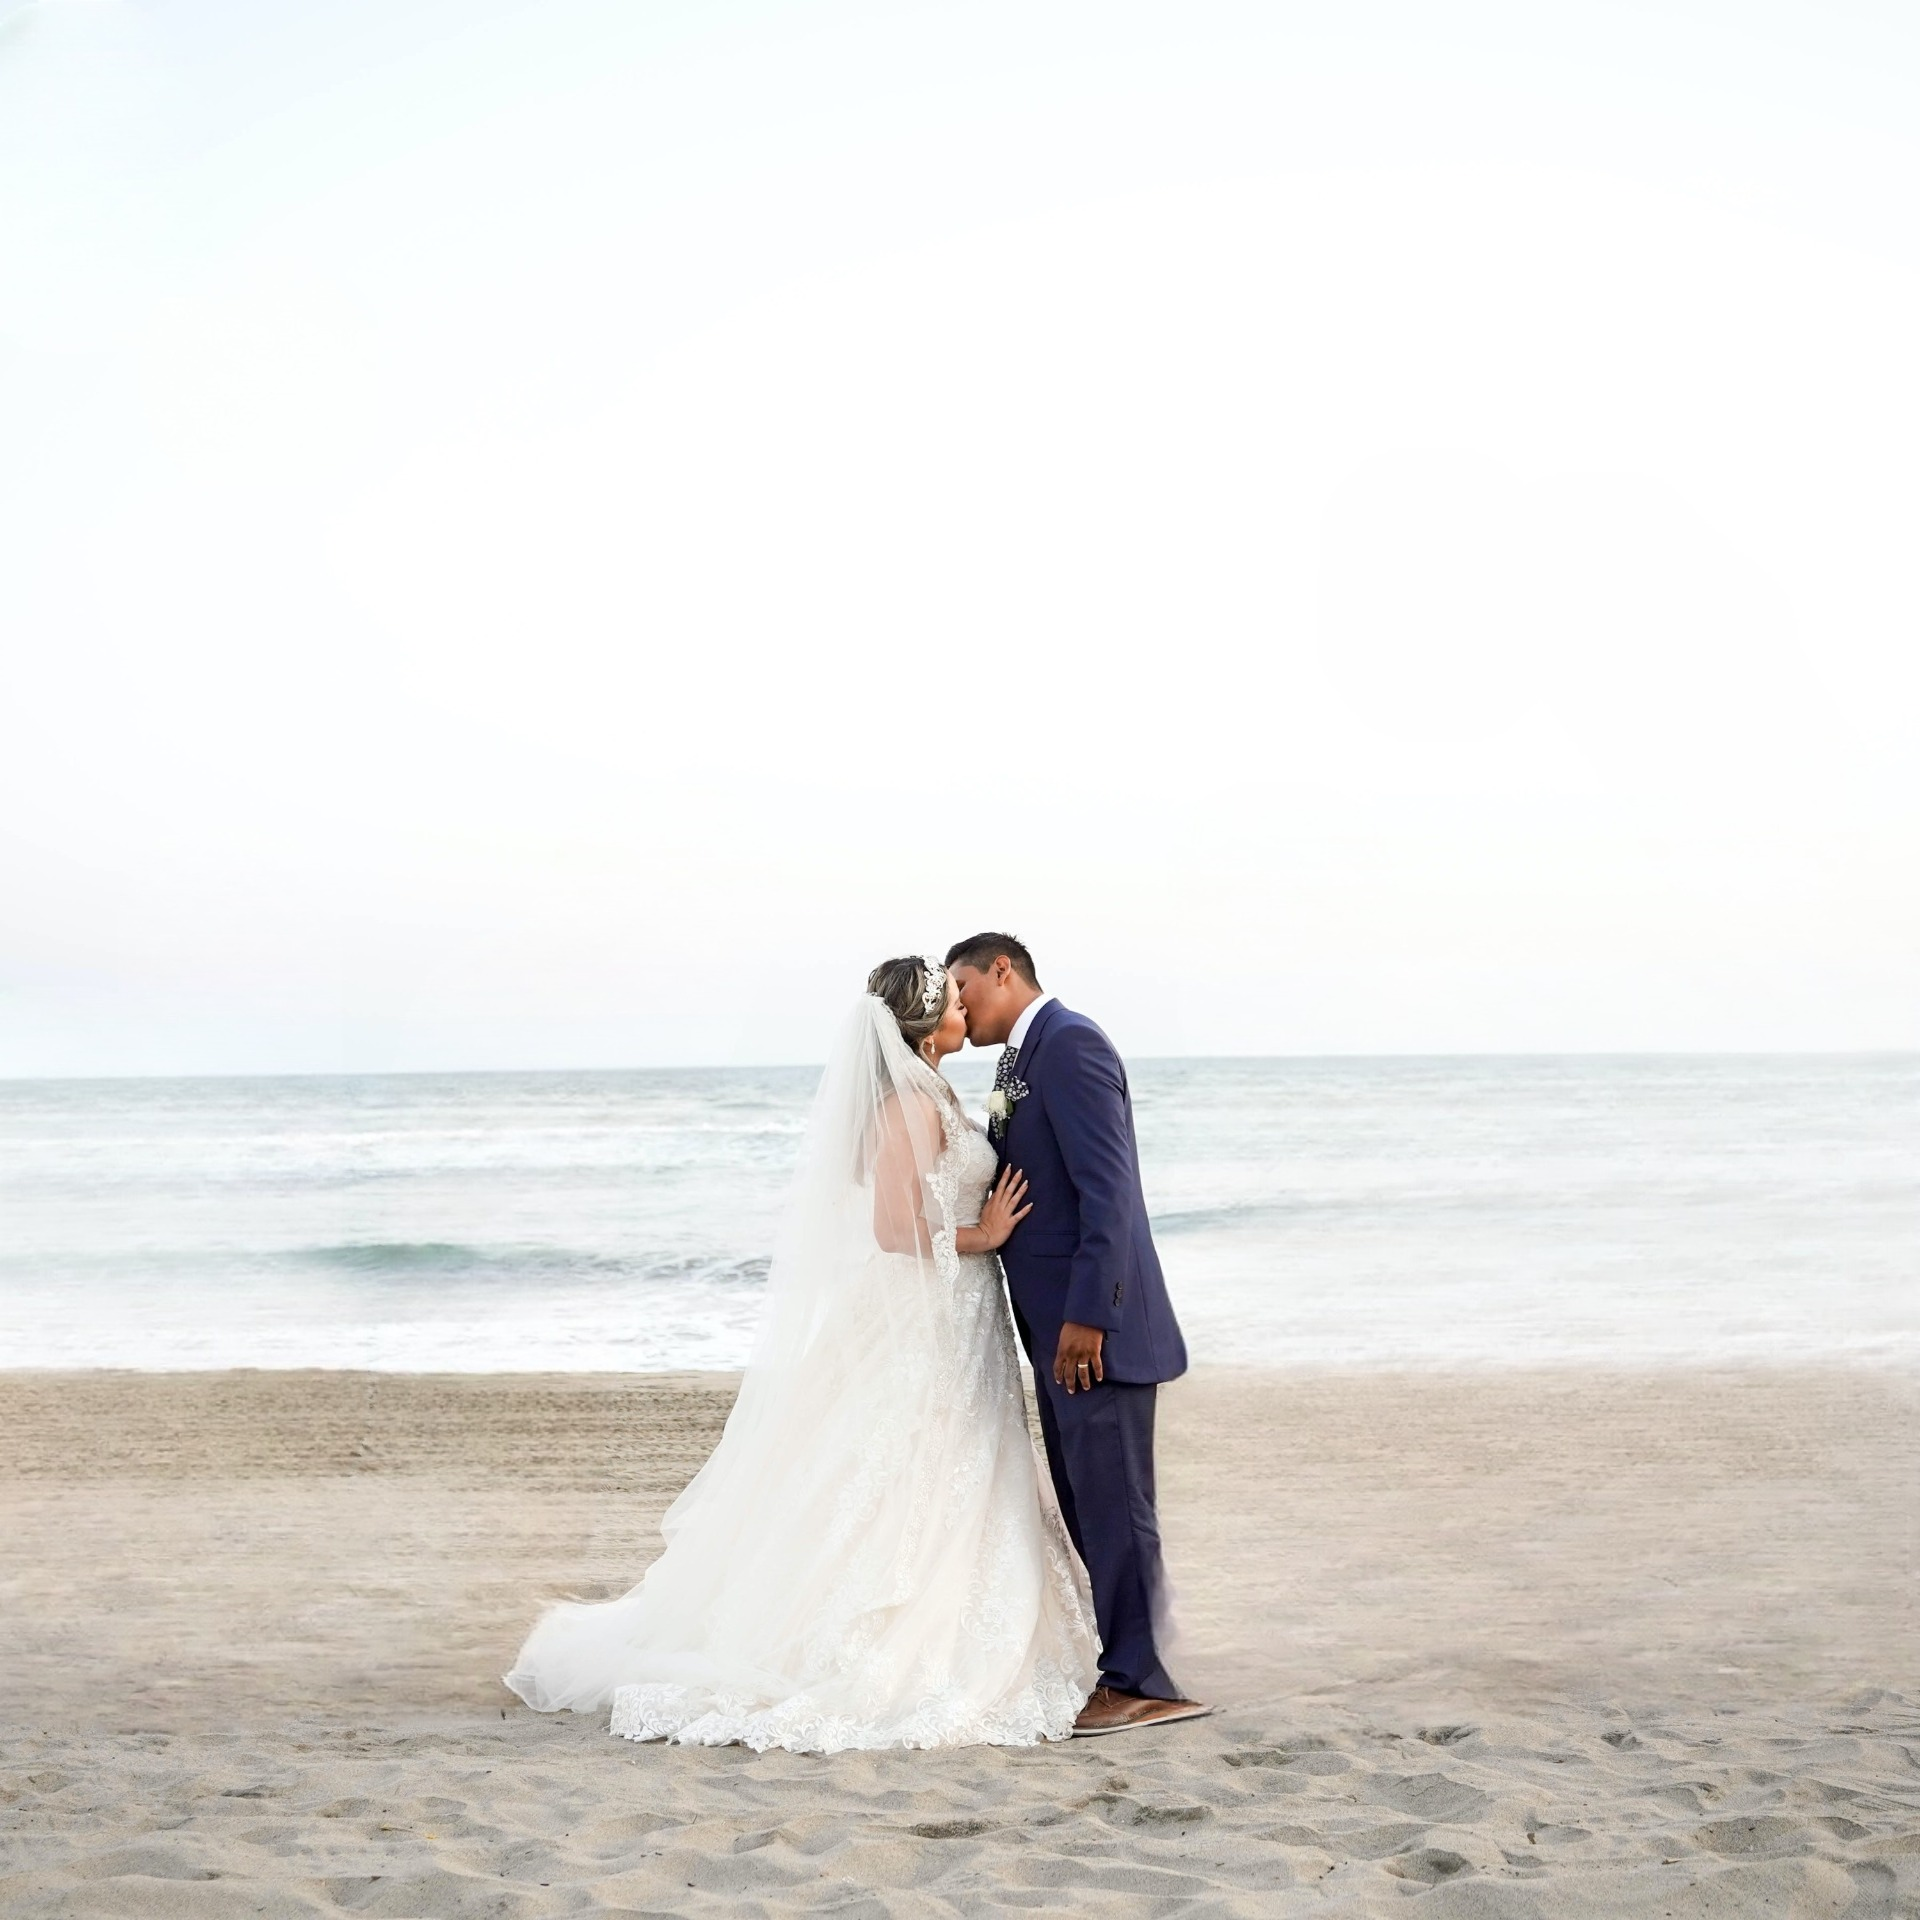 Image of the bride and groom on the beach, but the people are removed.